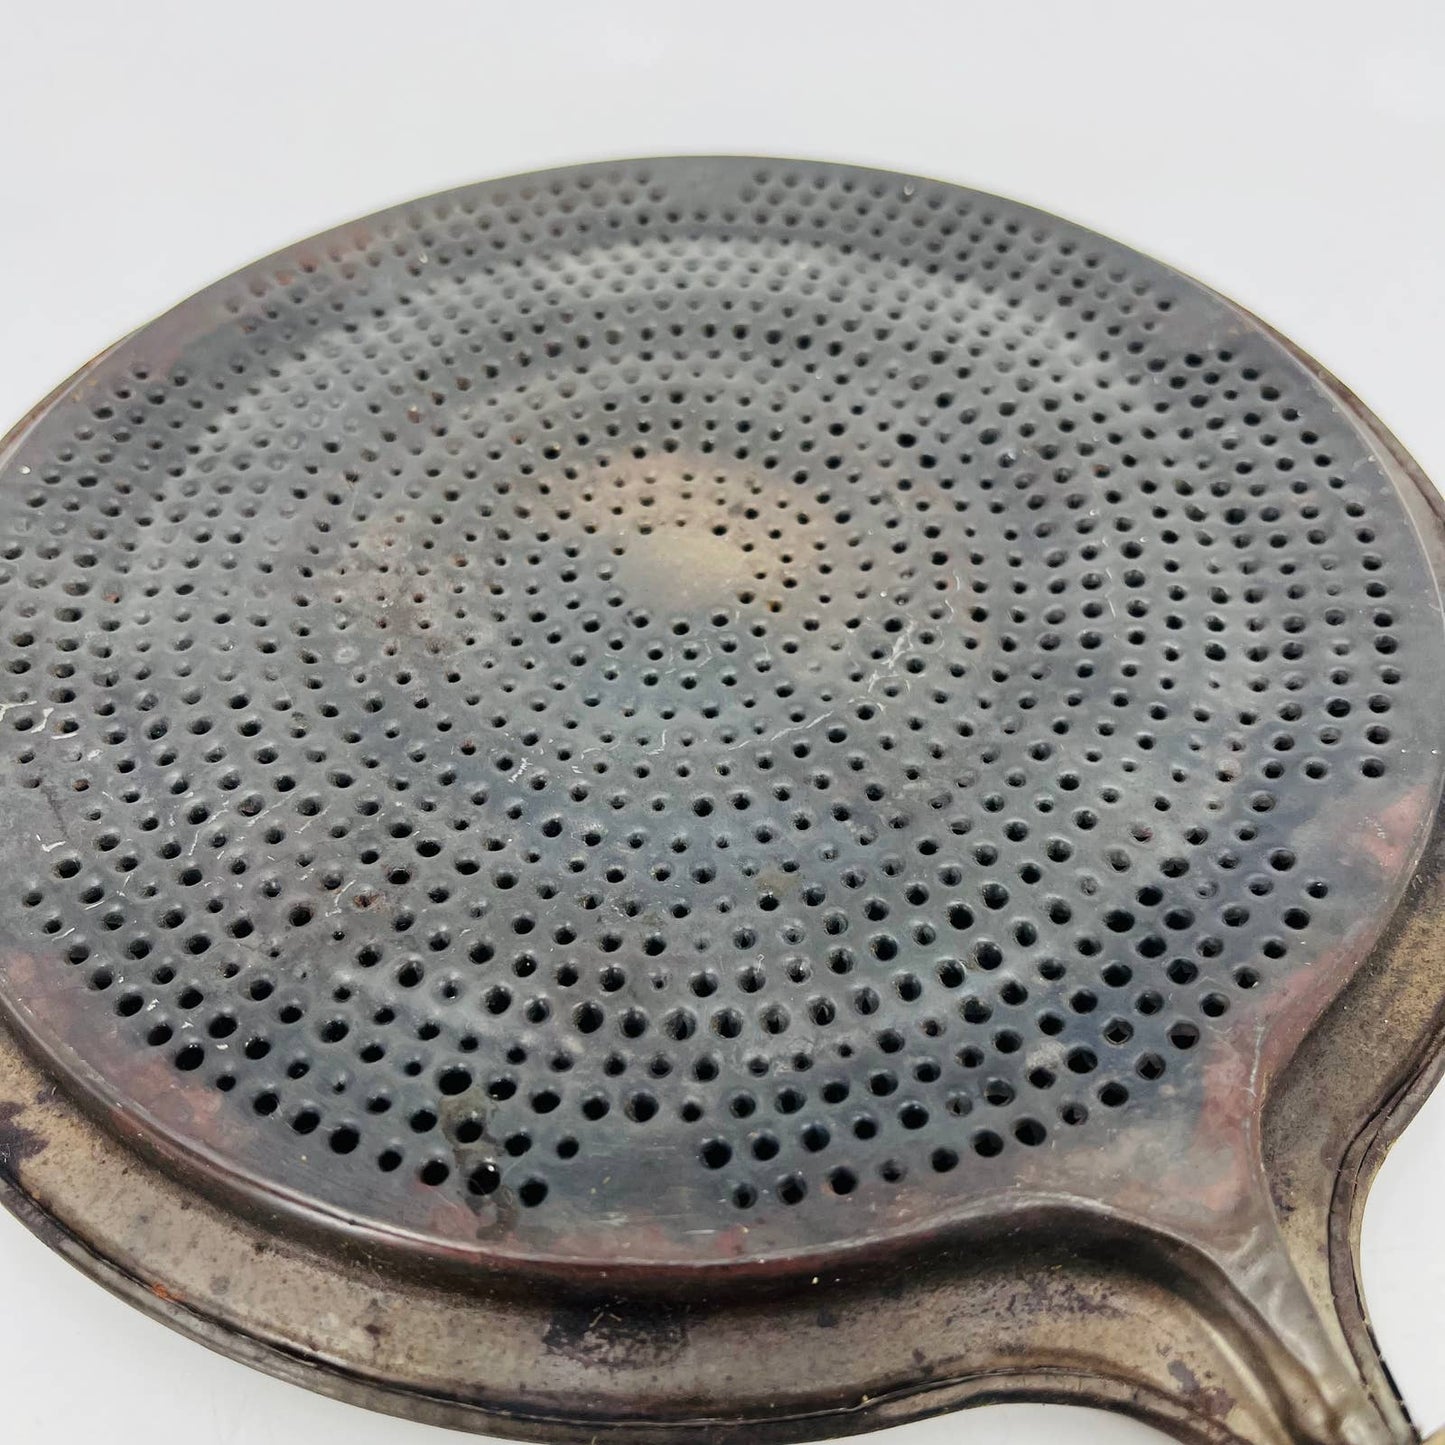 1920s Stove Top Heat Diffuser Round Metal Flame Fanner Wood Handle 14” TC6